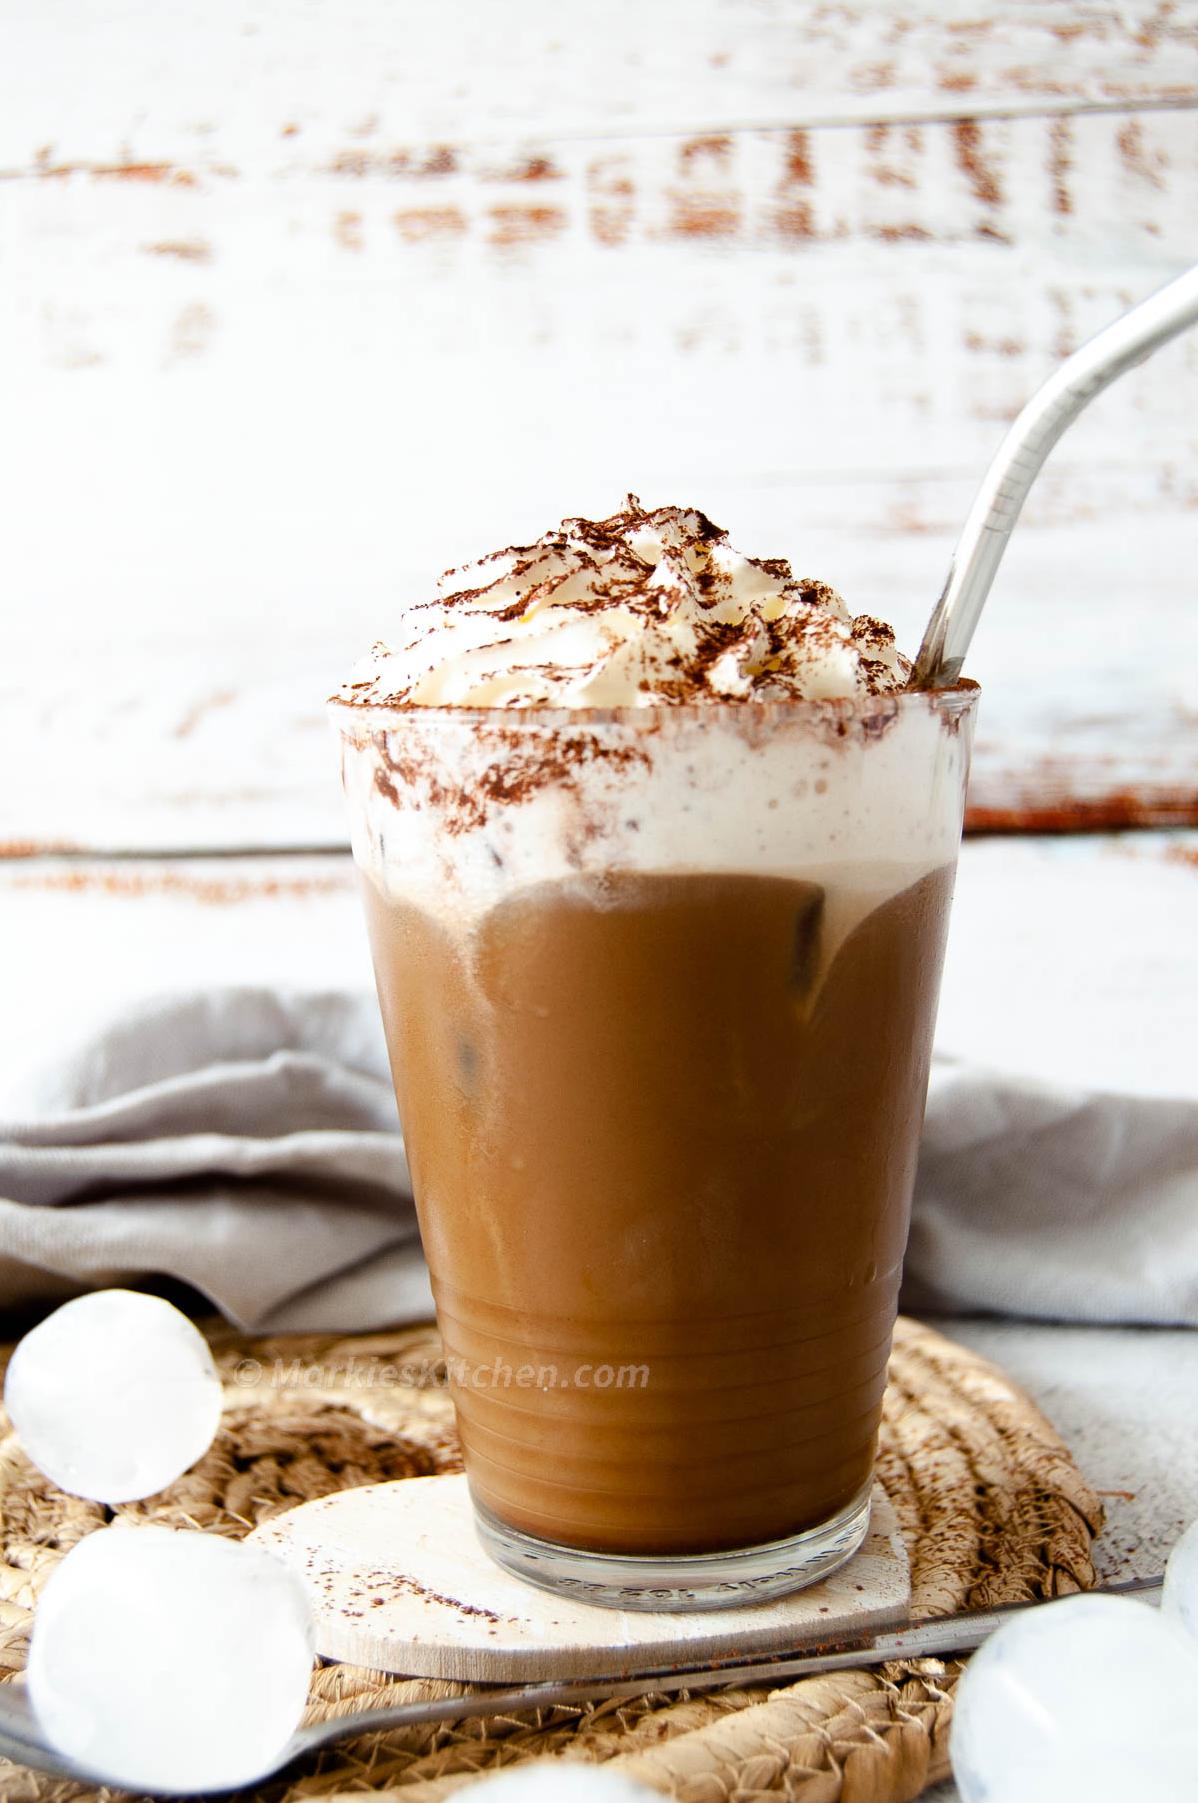  Rich, creamy and packed with flavors - this coffee is a game changer.